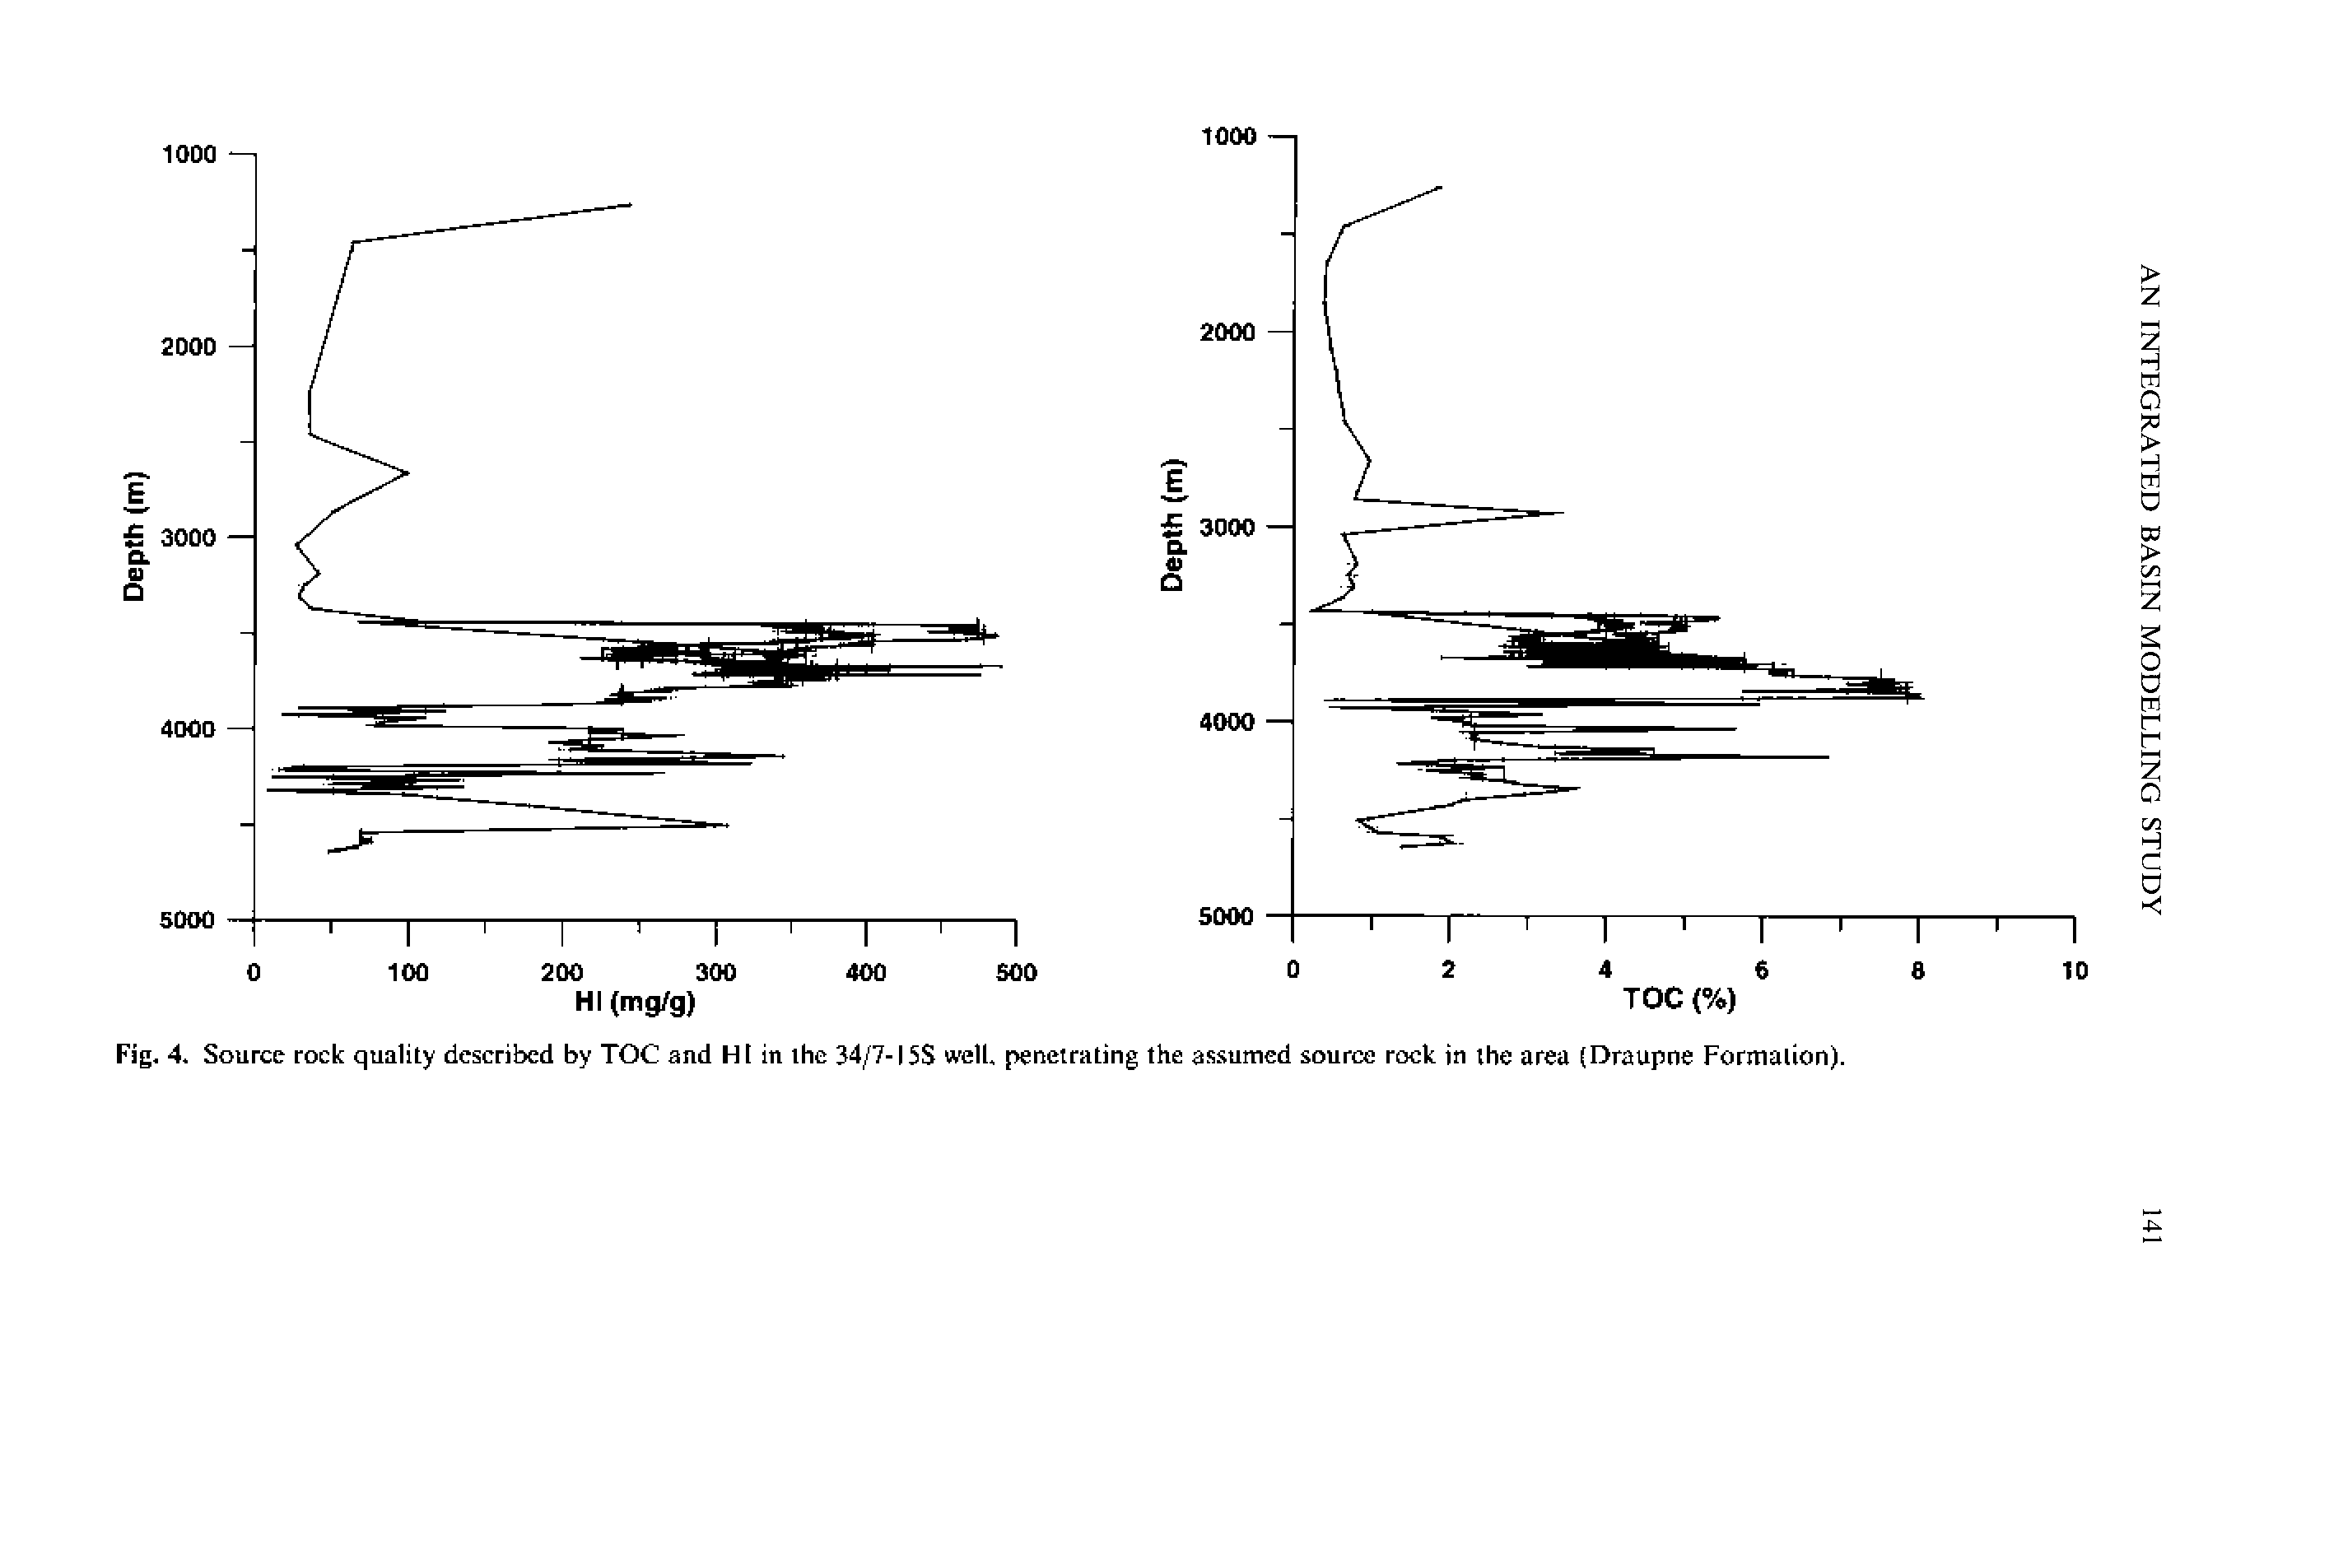 Fig. 4. Source rock quality described by TOC and HI in the 34/7-15S well, penetrating the assumed source rock in the area Draupne Formation).